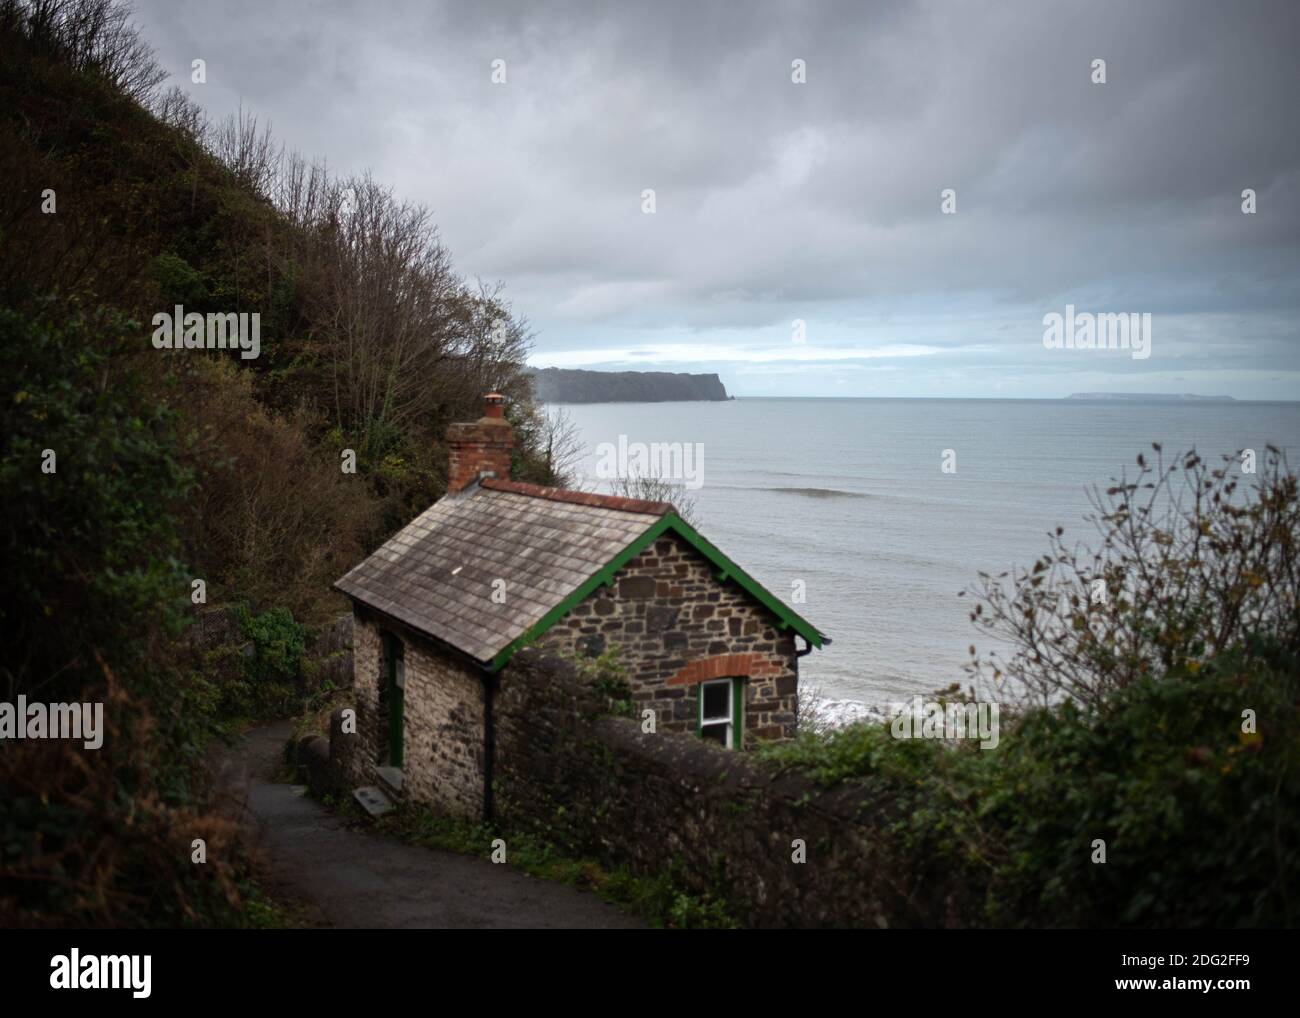 View looking down to the coastline from Bucks Mills village in Devon, England with artist's cabin and Lundy Island visible on horizon. November 2020 Stock Photo